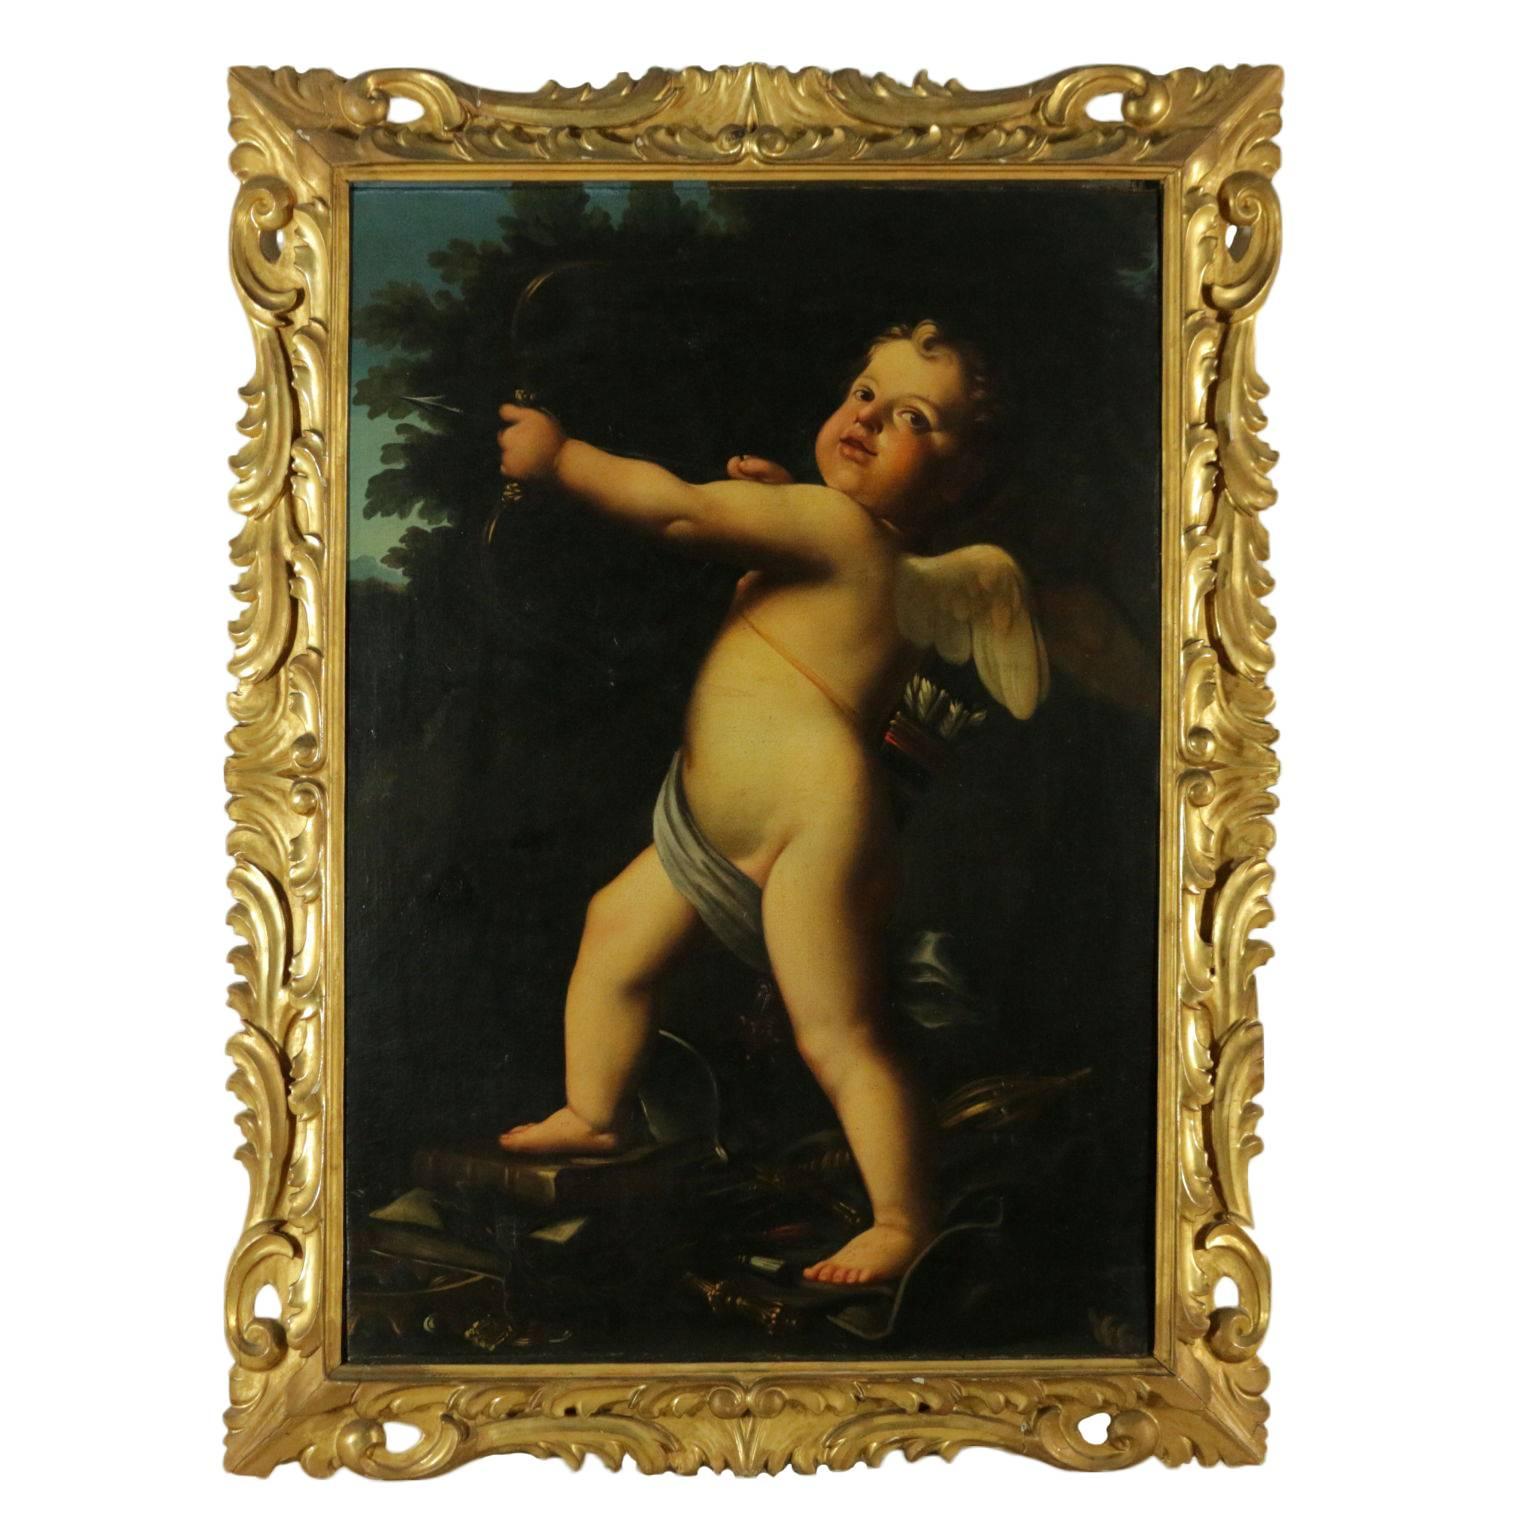 Unknown Nude Painting - Setting by Marcantonio Franceschini Cupid Oil on Canvas End 1600 - Early 1700